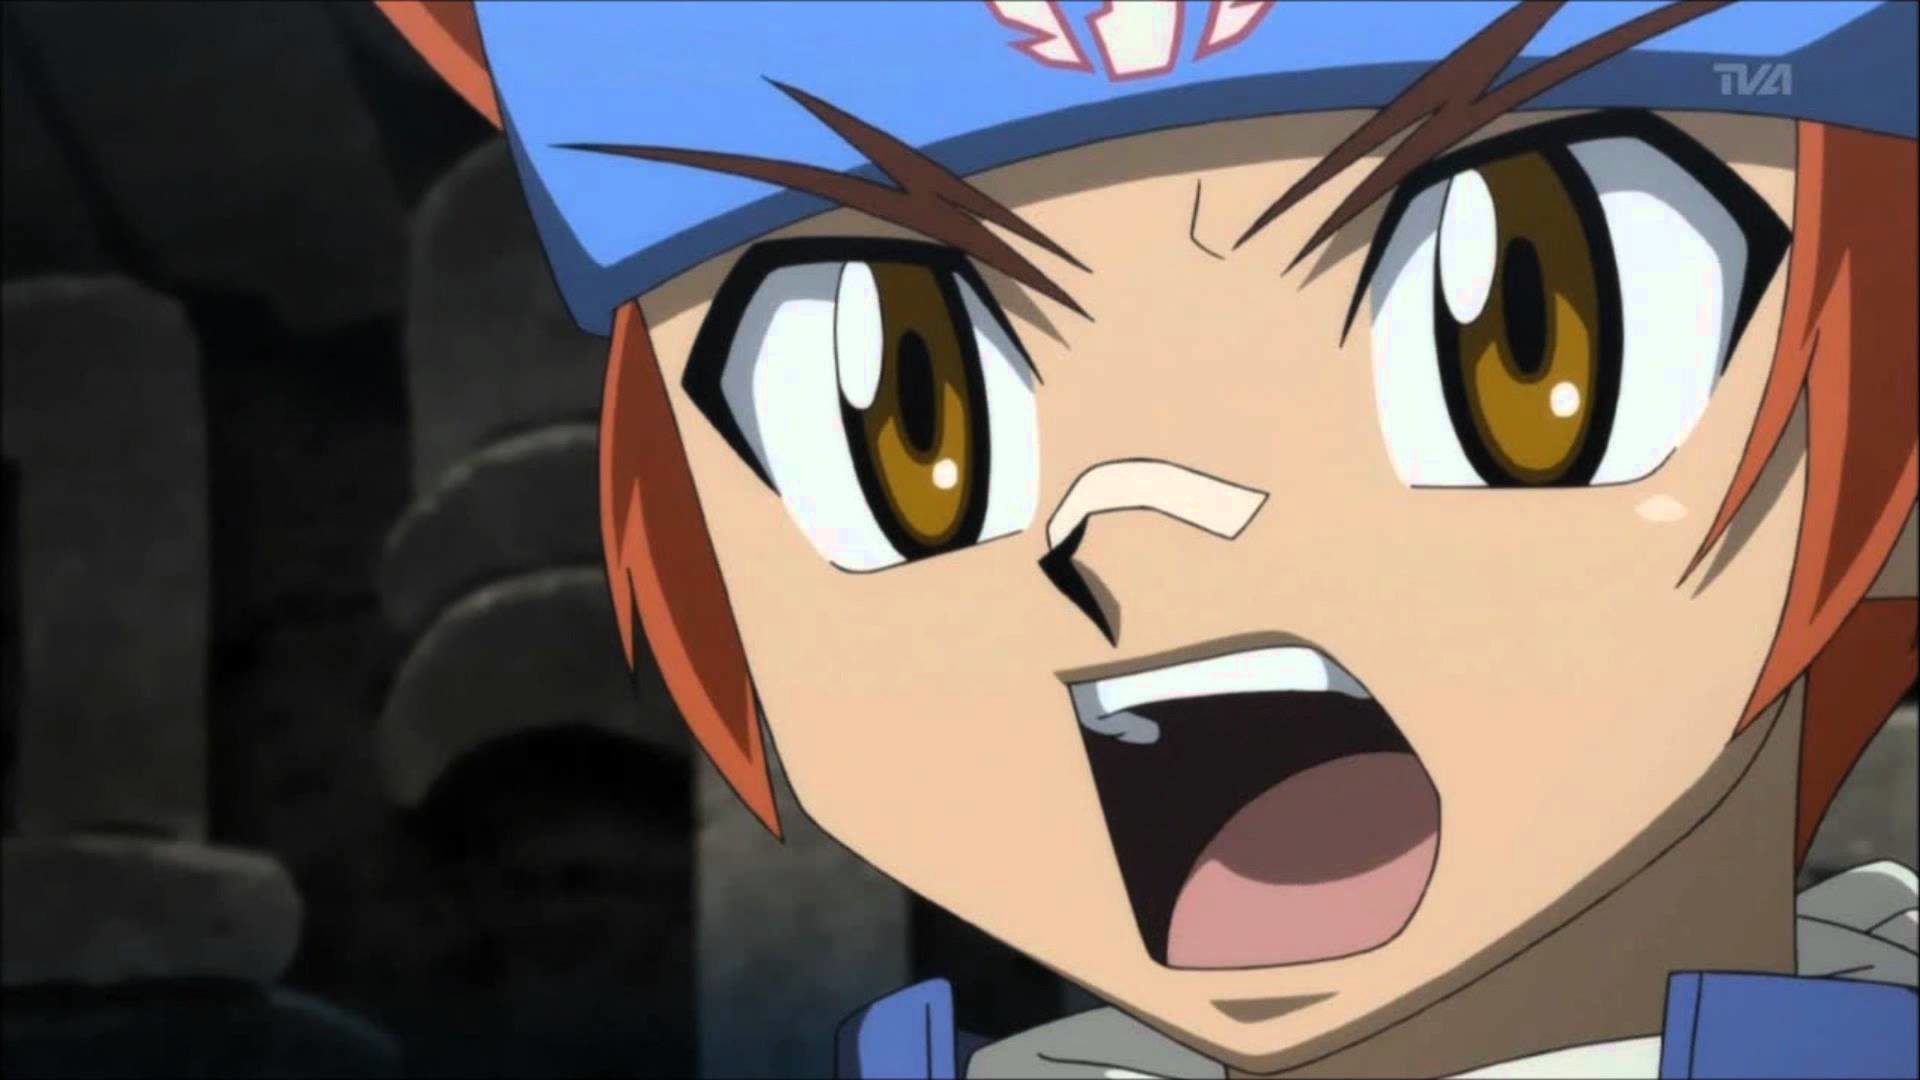 Beyblade HD Wallpaper (70+ images)1920 x 1080